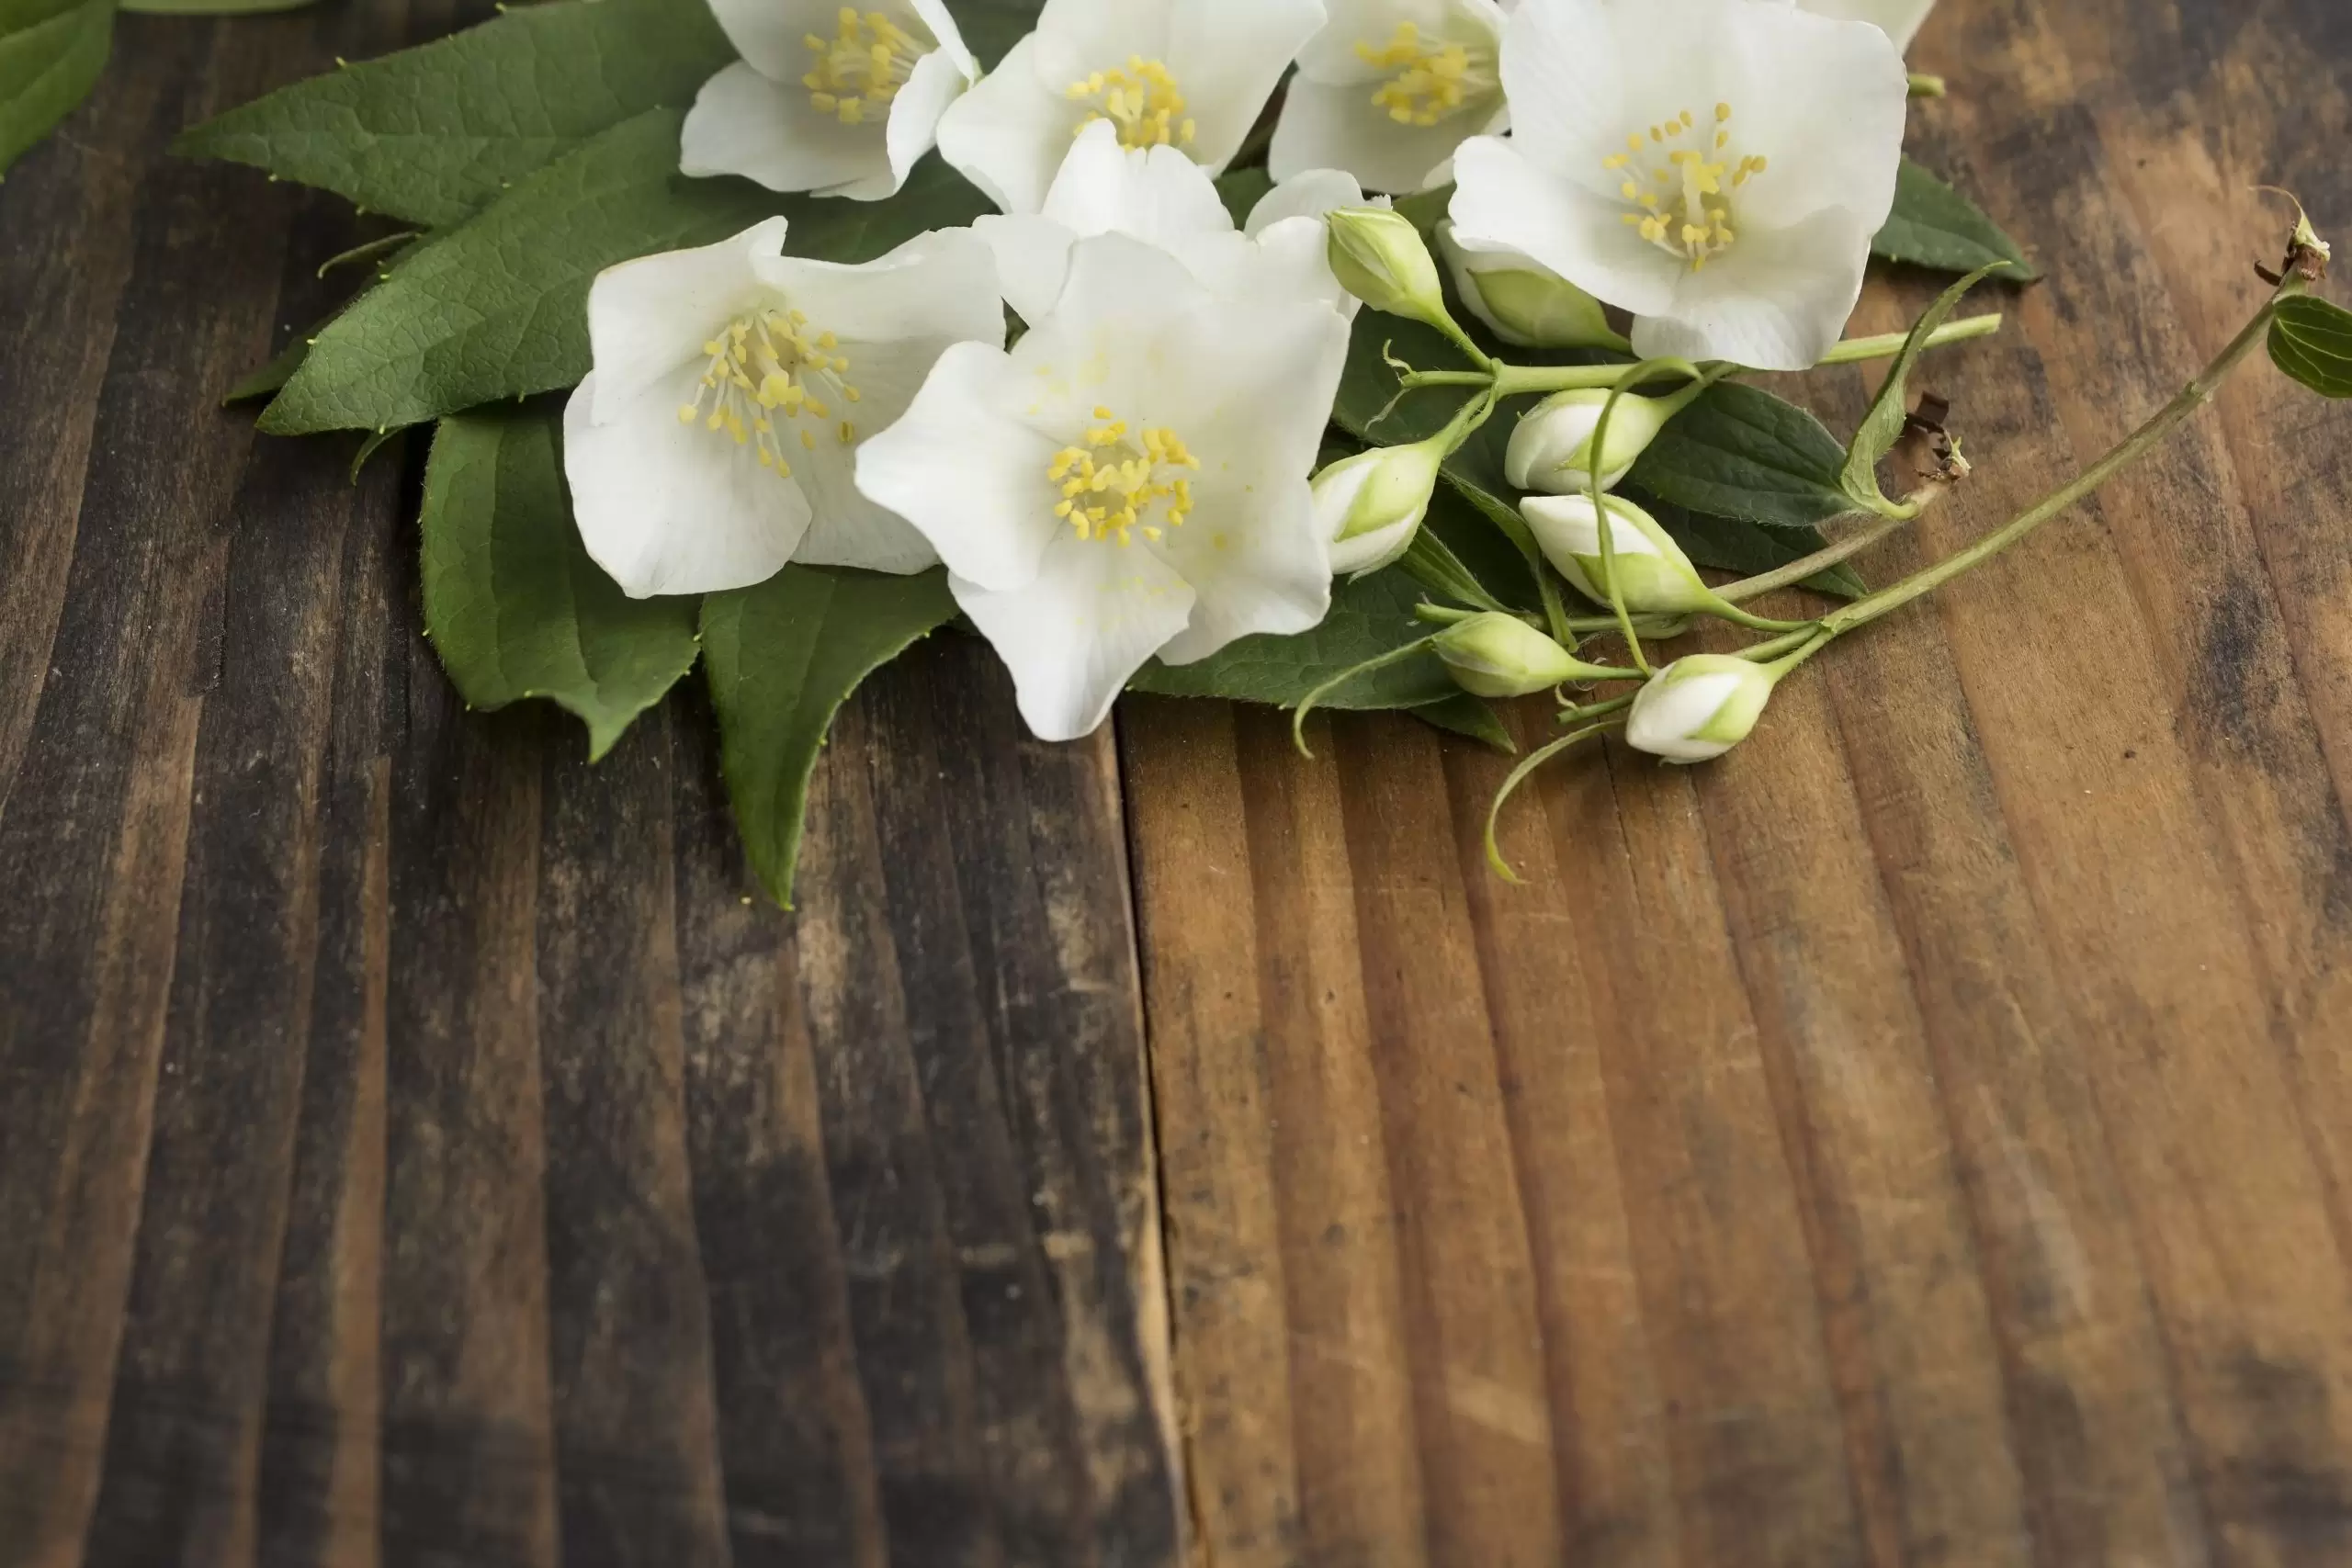 jasmin-with-copy-space-on-rustic-wooden-background-L8SUGVX-min